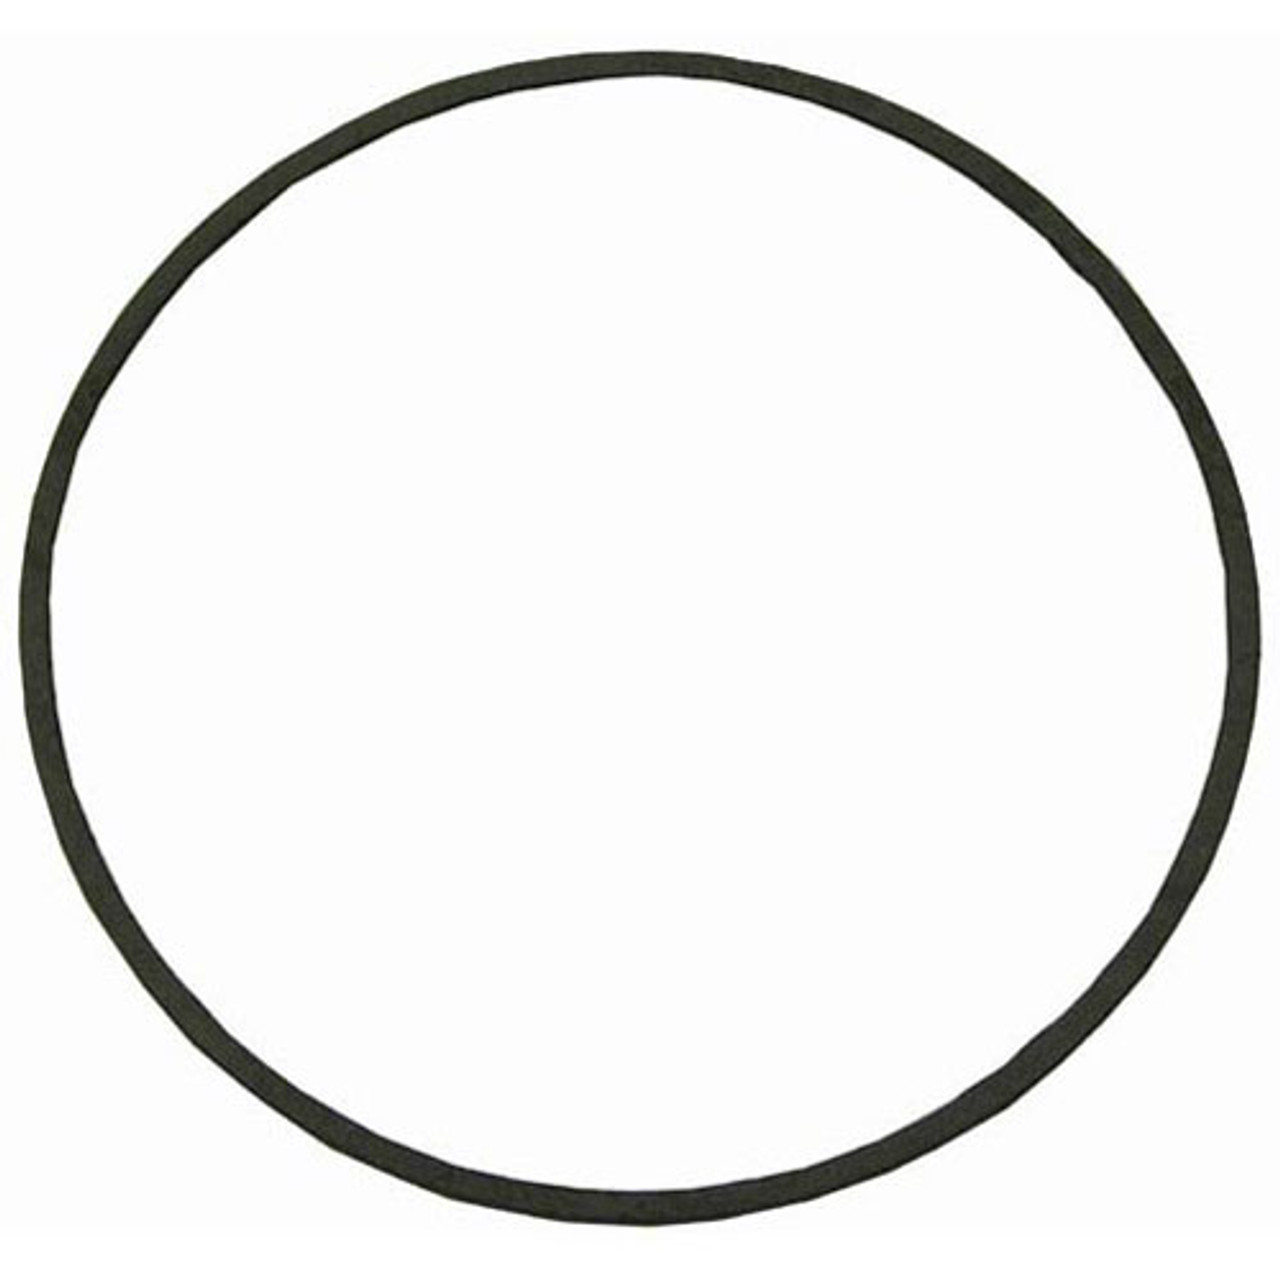 Stero A57-3287 - Gasket For Gould Pump